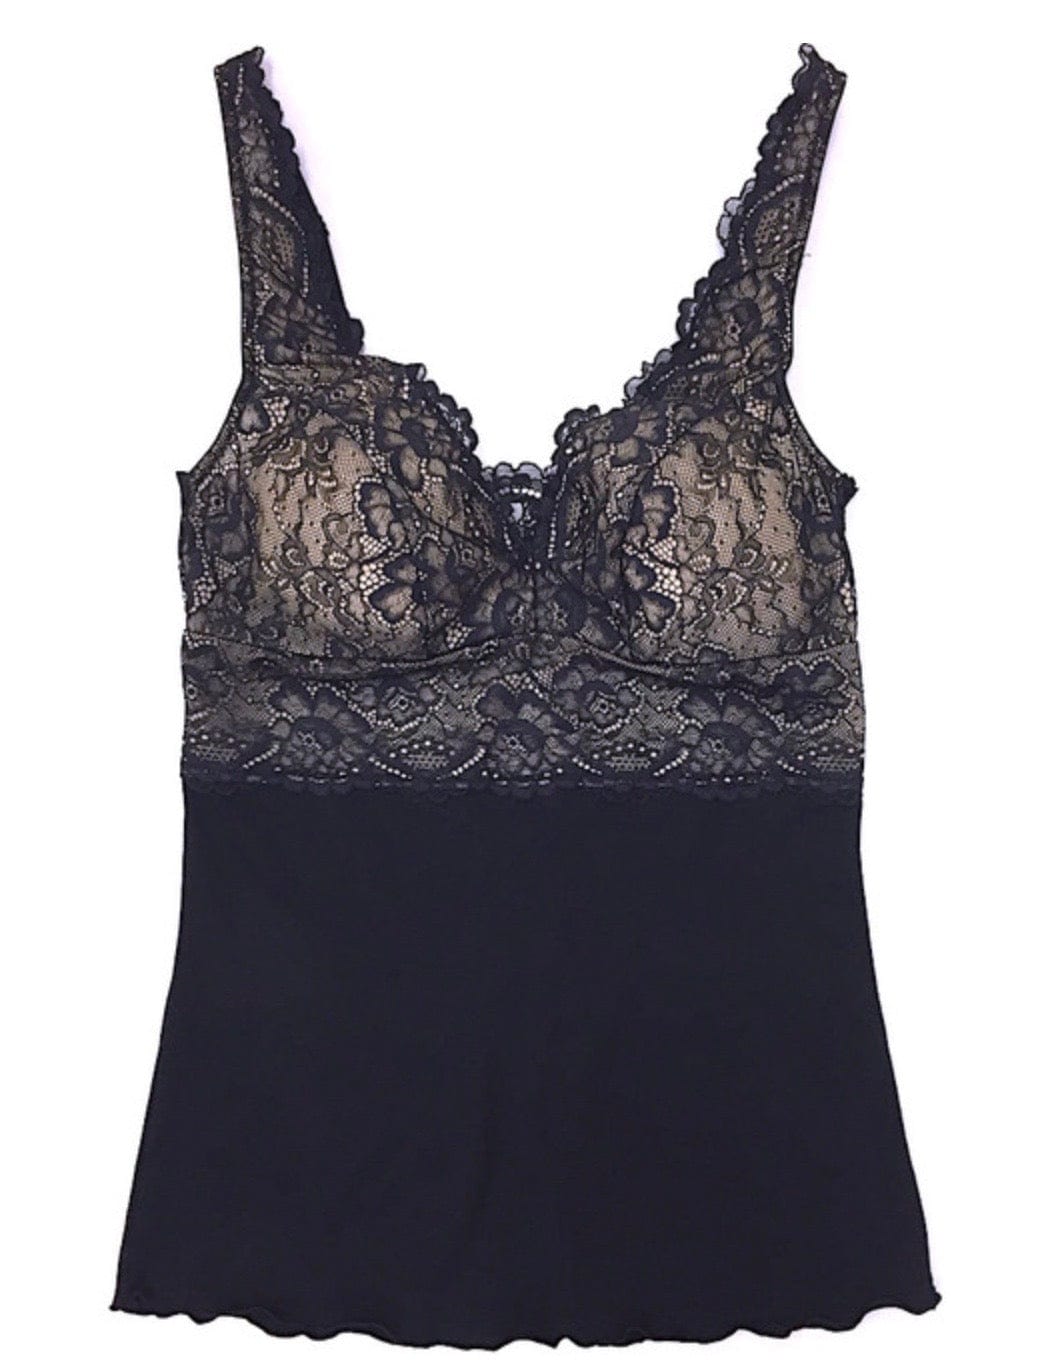 Samantha Chang camisole Black/Black Lace / S Samantha Chang Home Apparel Built Up Camisole